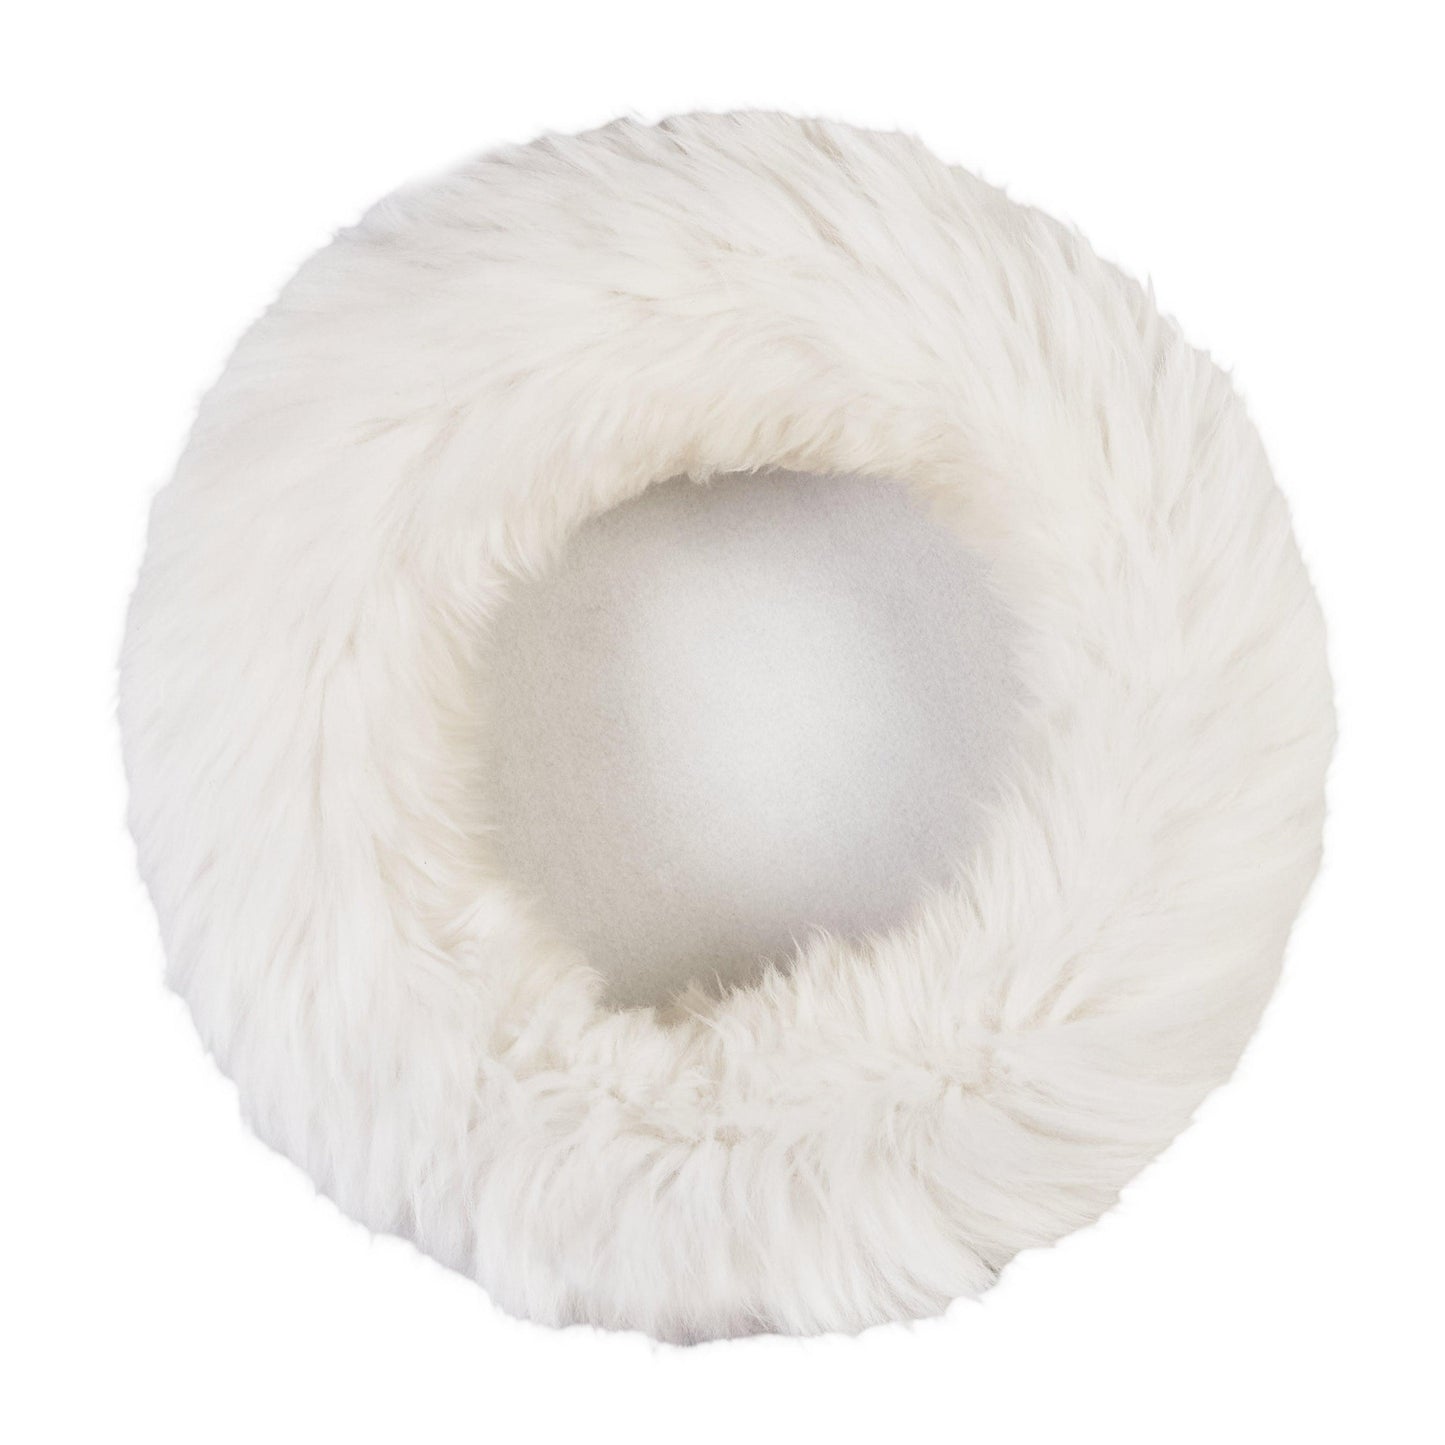 A Round Natural Sheepskin Pet Bed from Mellow Pet Store on a white background, perfect for eco-luxury pet supplies.